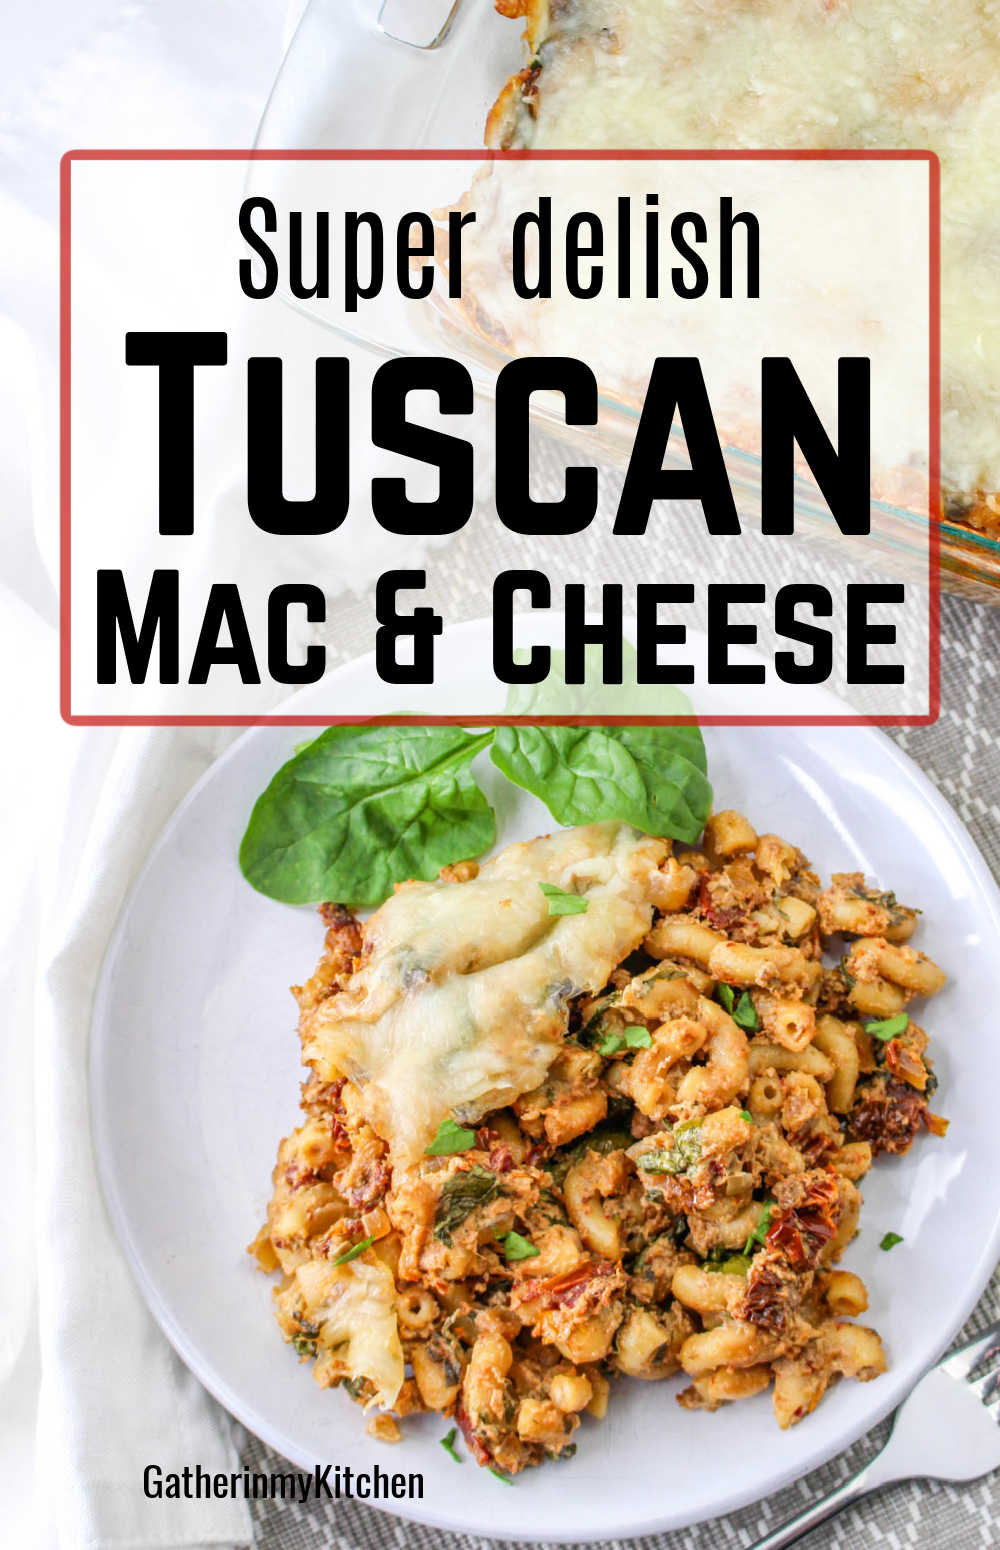 Pin image: top says "Super delish tuscan mac & cheese" and background is a plate of tuscan mac & cheese.